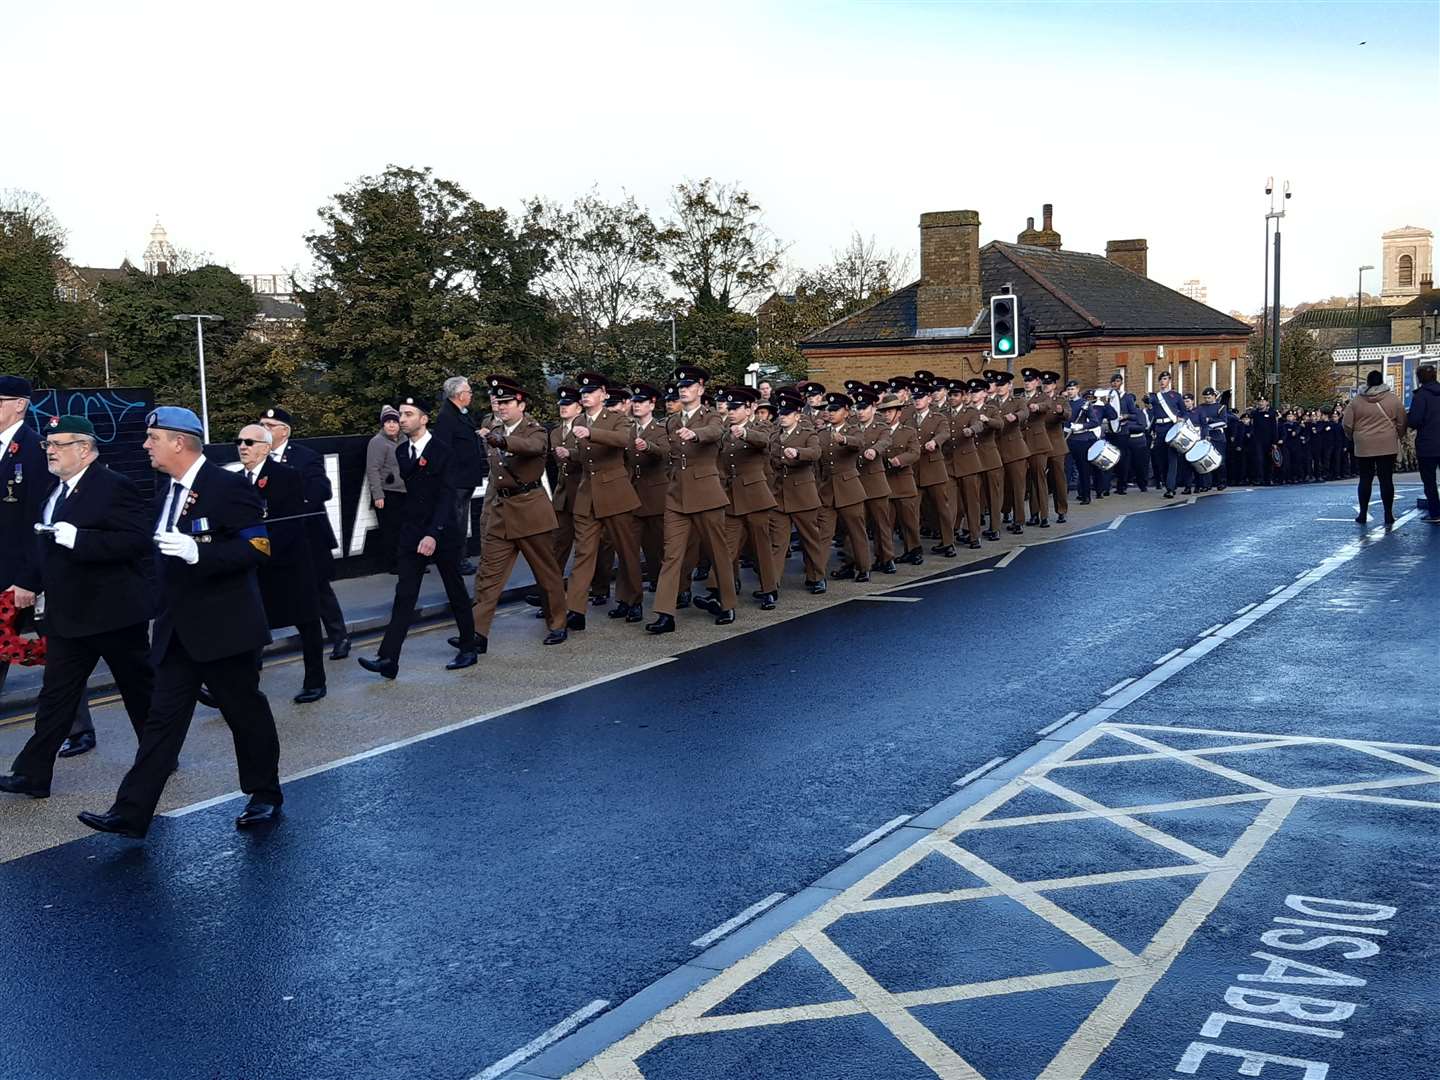 Medway remembers fallen soldiers and war casualties on Remembrance Sunday with the annual parade through Chatham